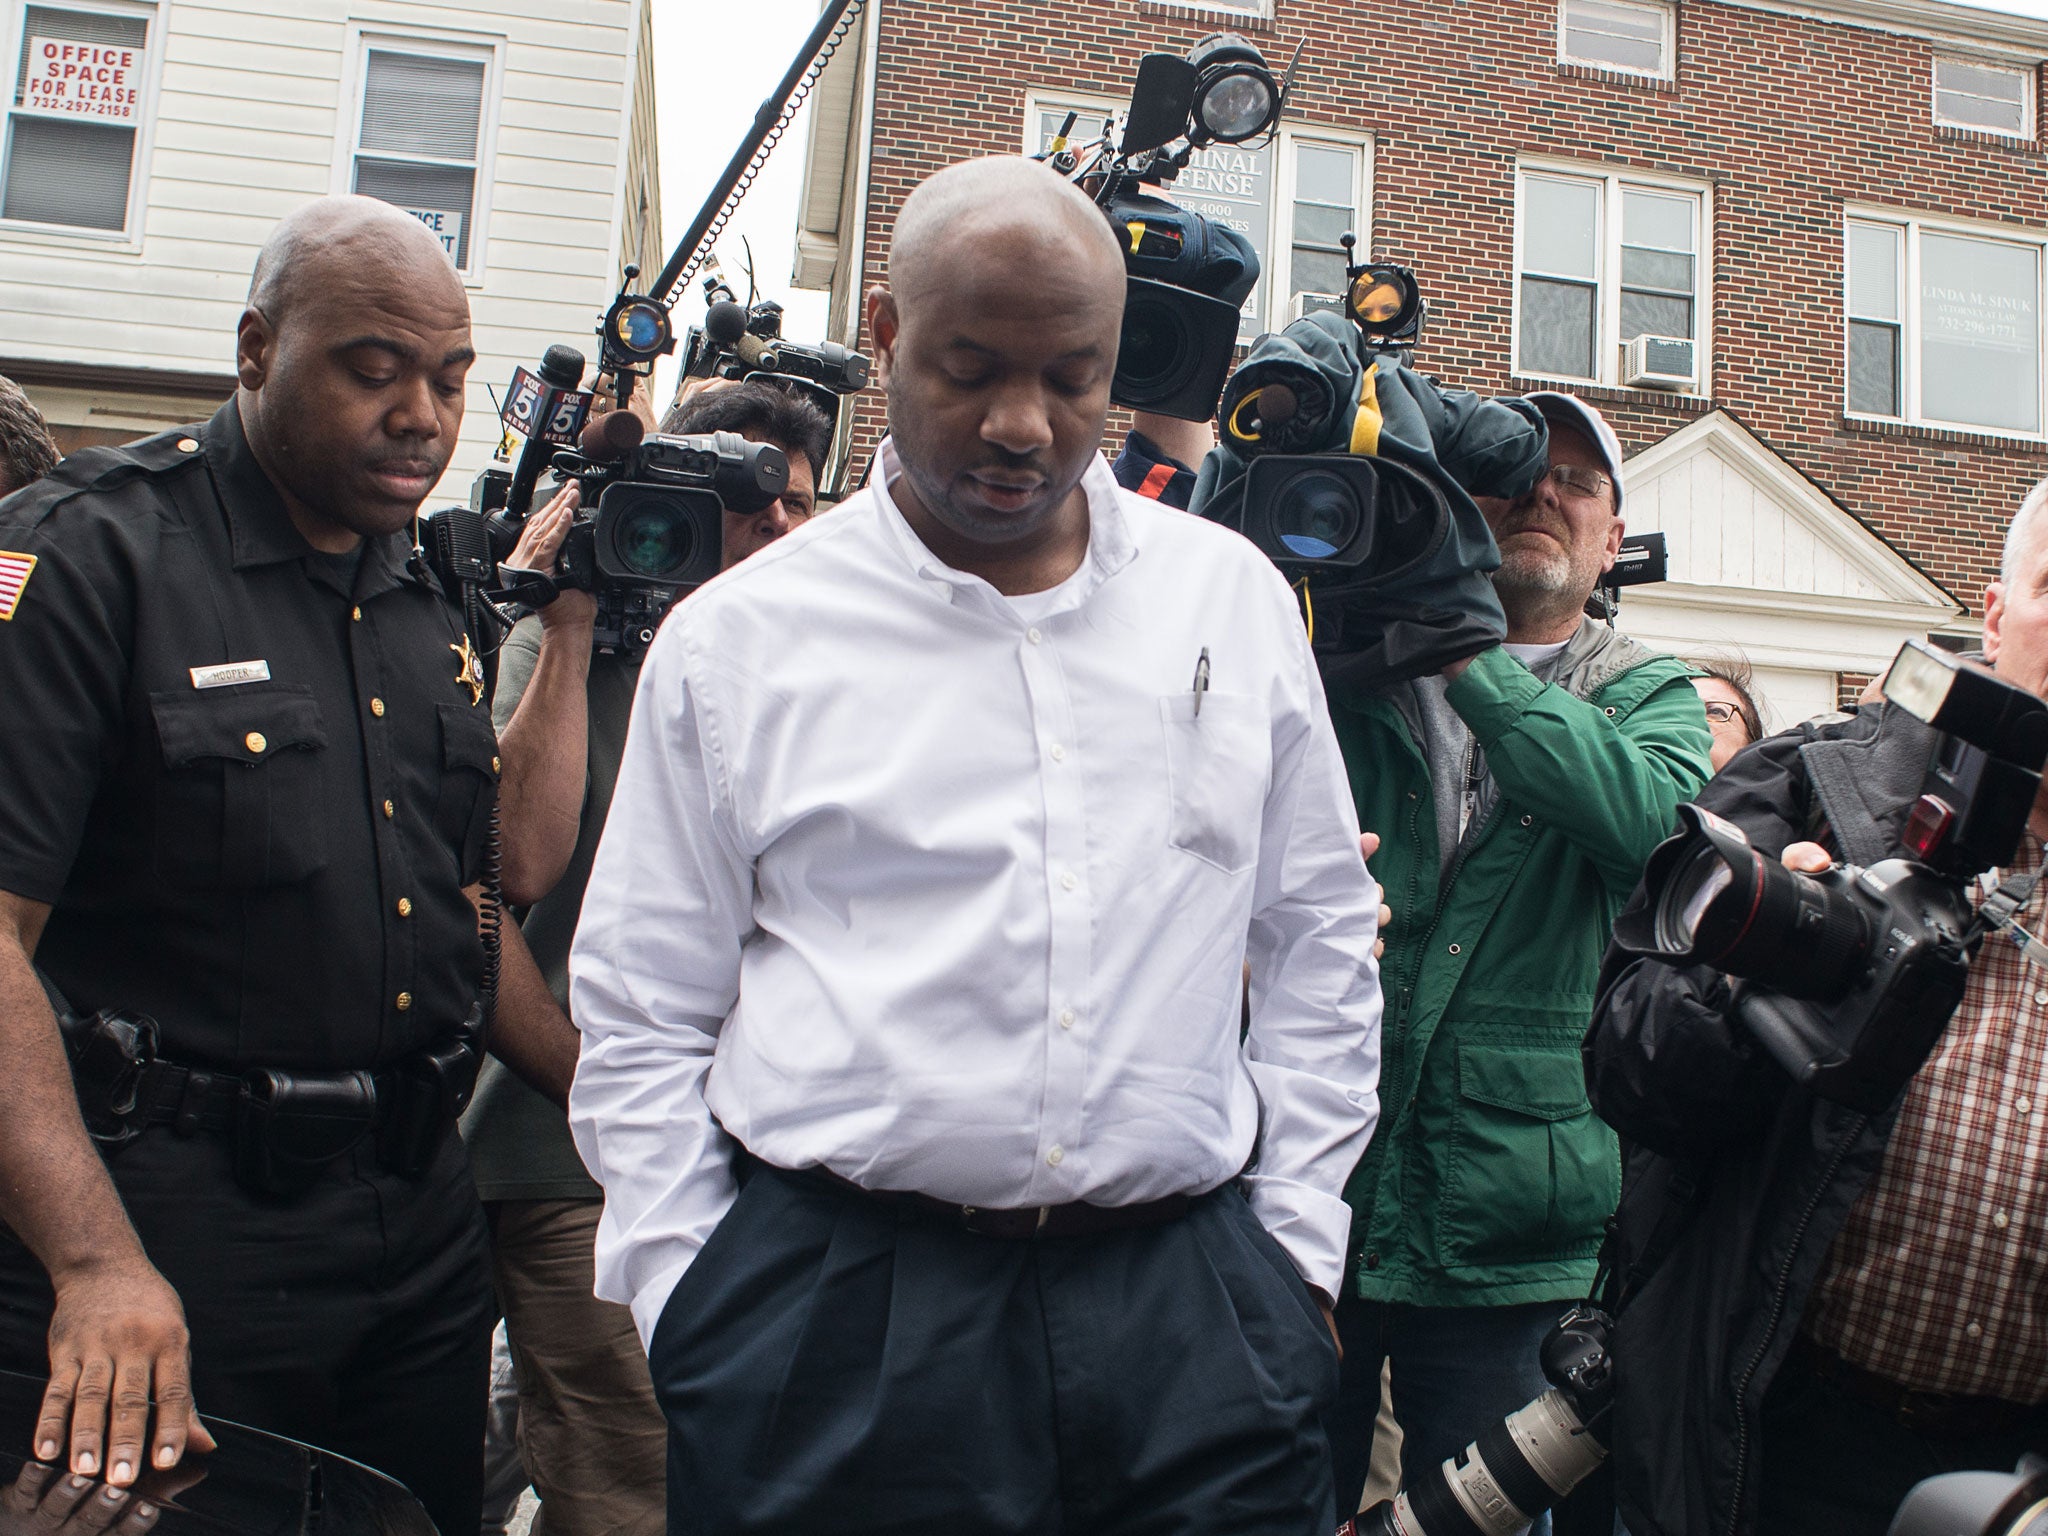 Kevin Roper departs after his court appearance at Middlesex County Courthouse on 11 June, 2014, in New Brunswick, New Jersey